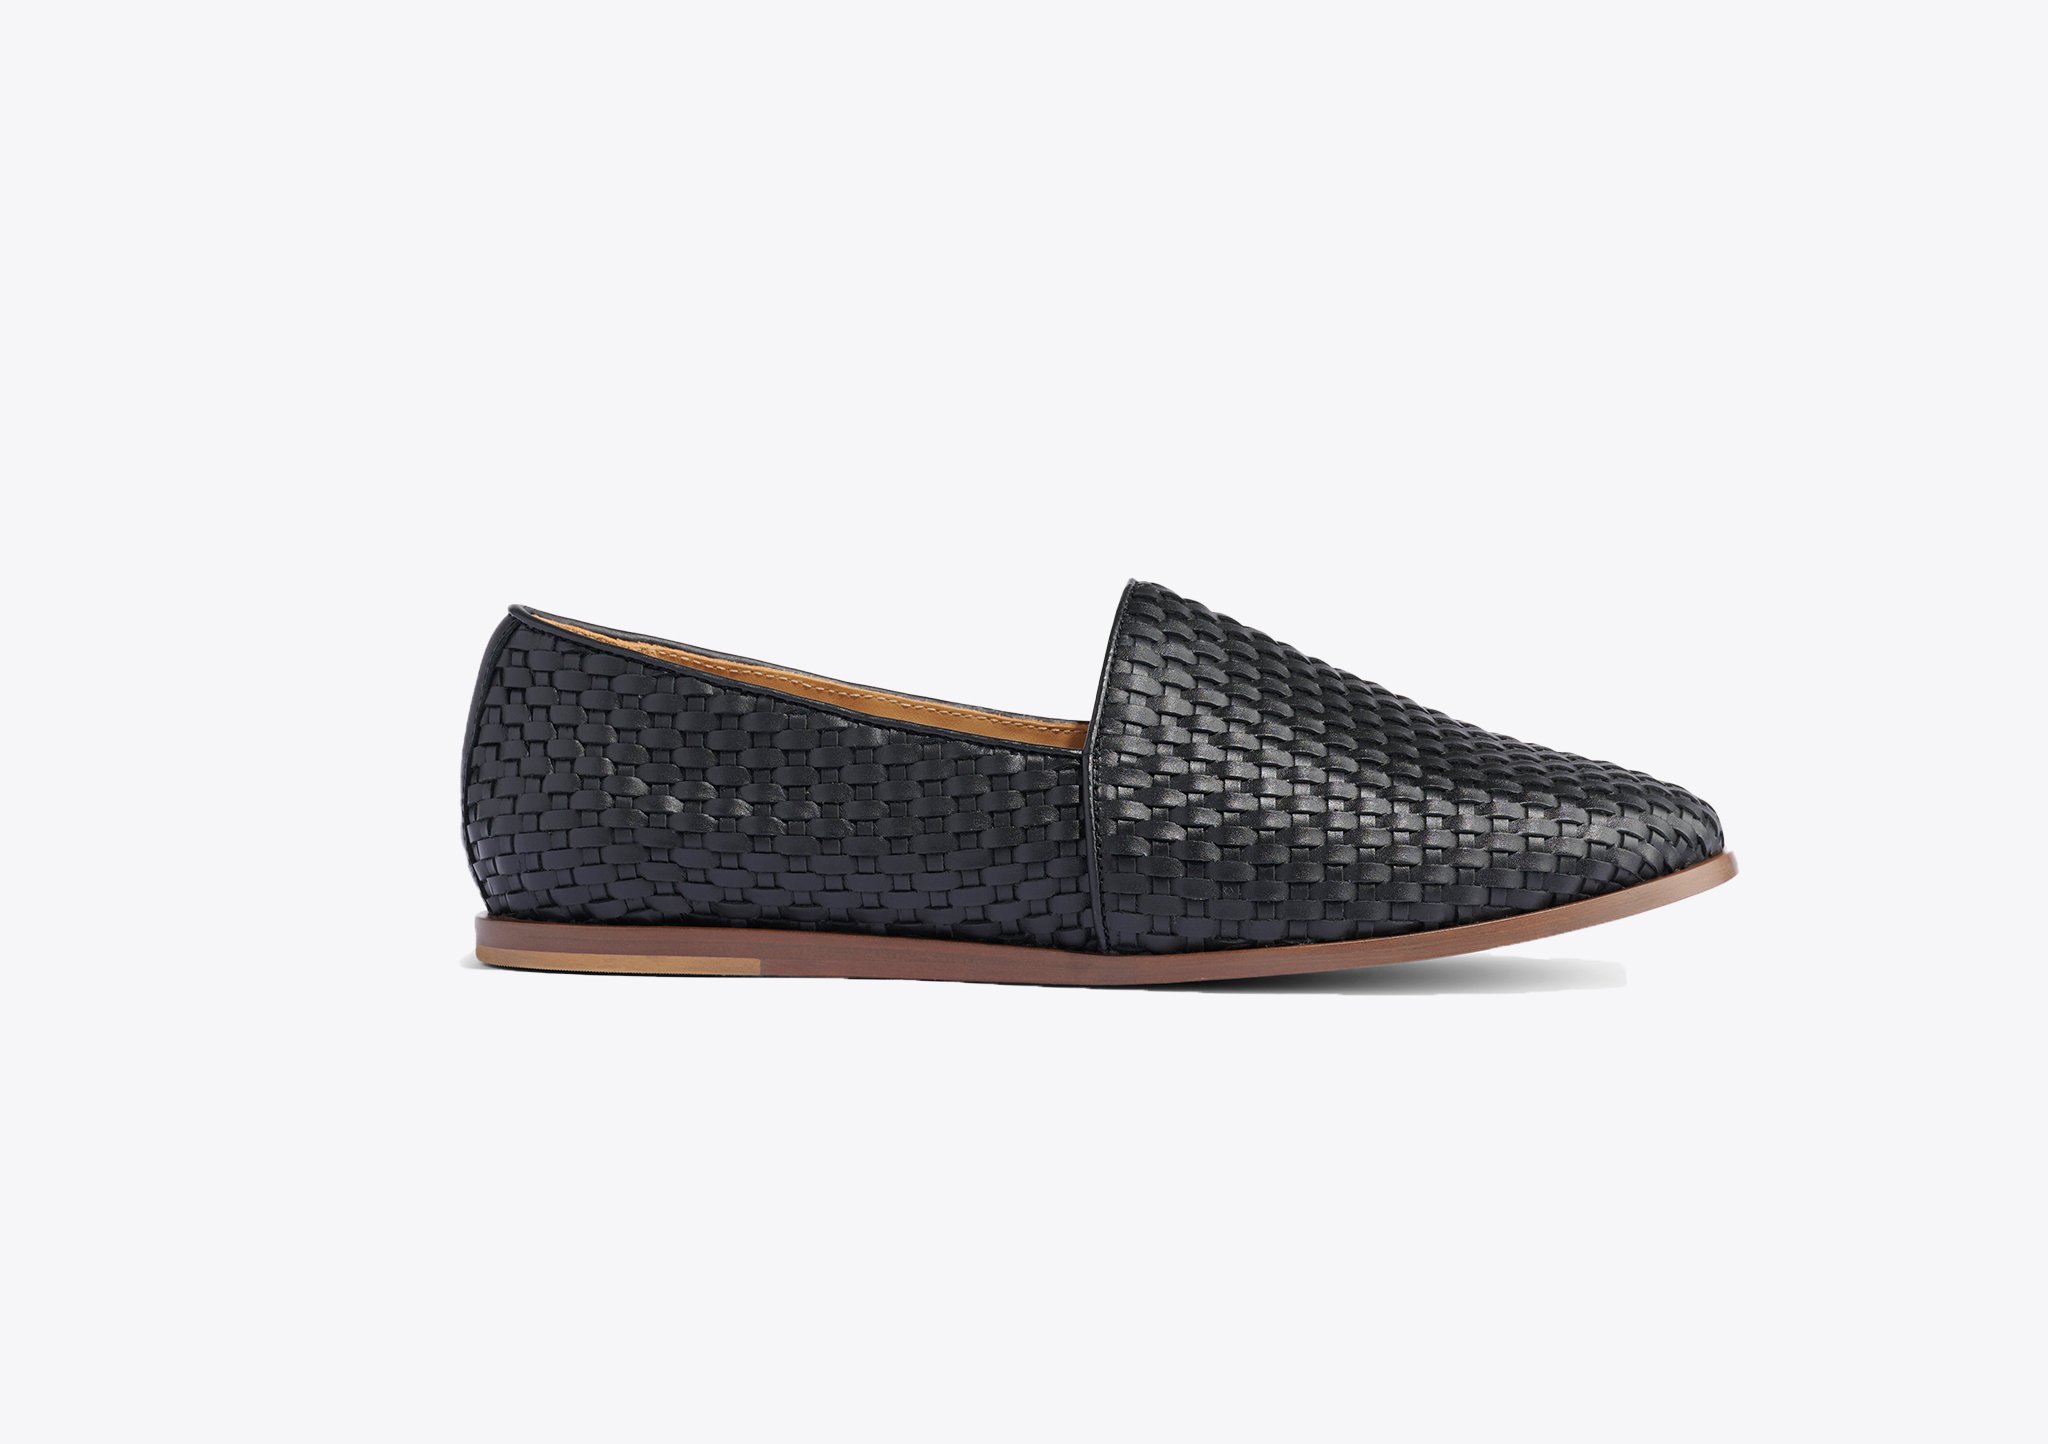 Nisolo Alejandro Woven Slip-On 2.0 Woven Black - Every Nisolo product is built on the foundation of comfort, function, and design. 